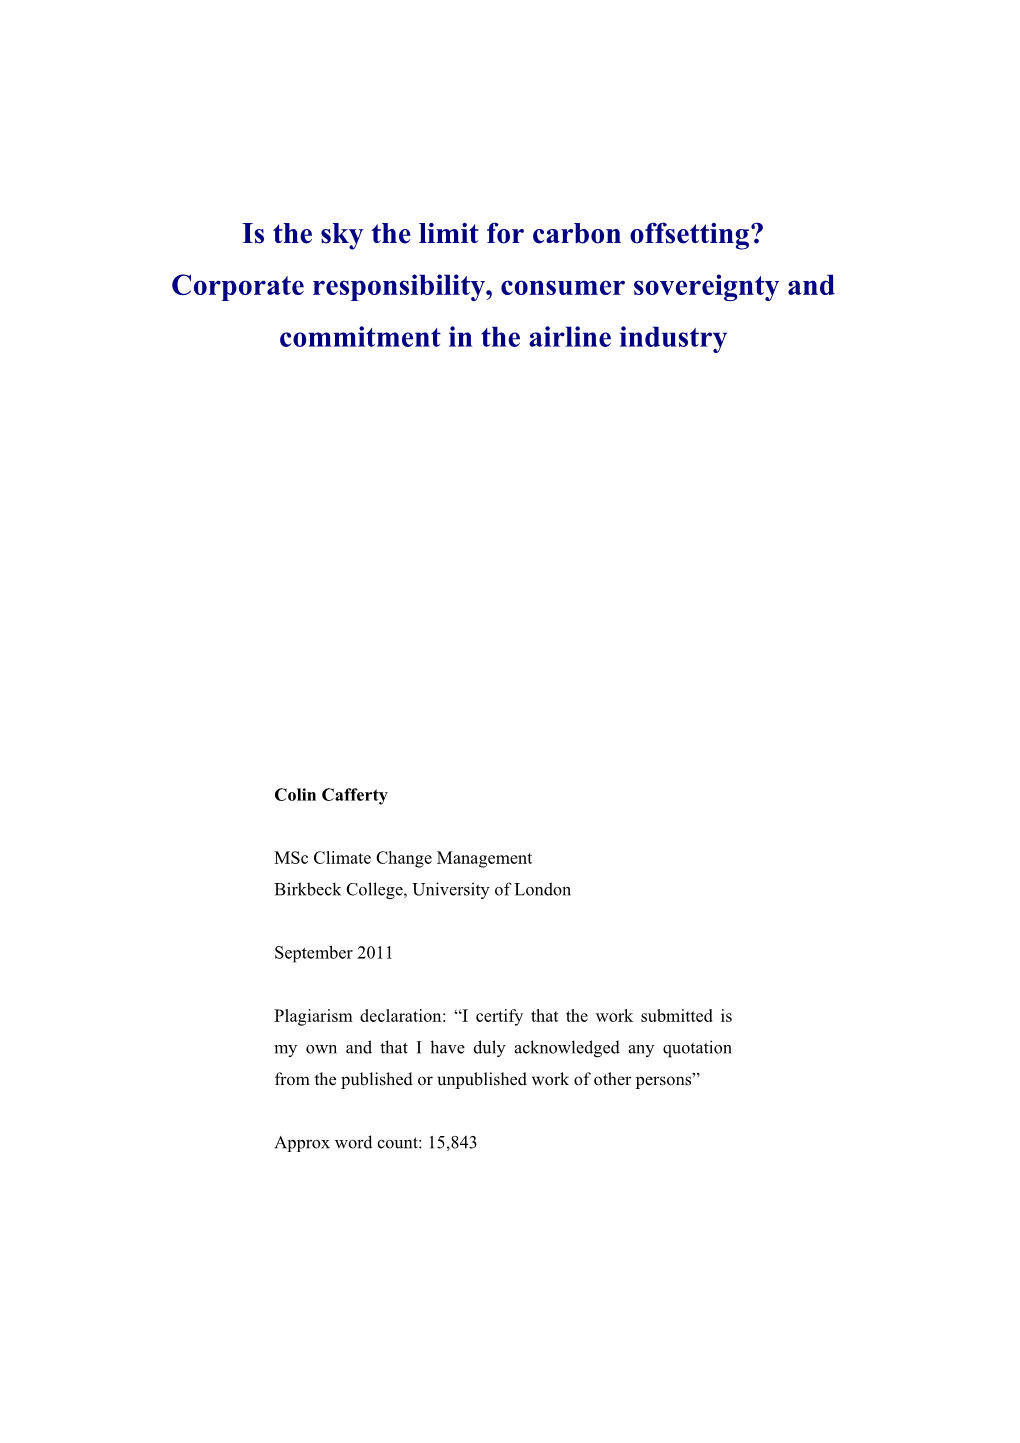 Dissertation Study on the Airline Industry